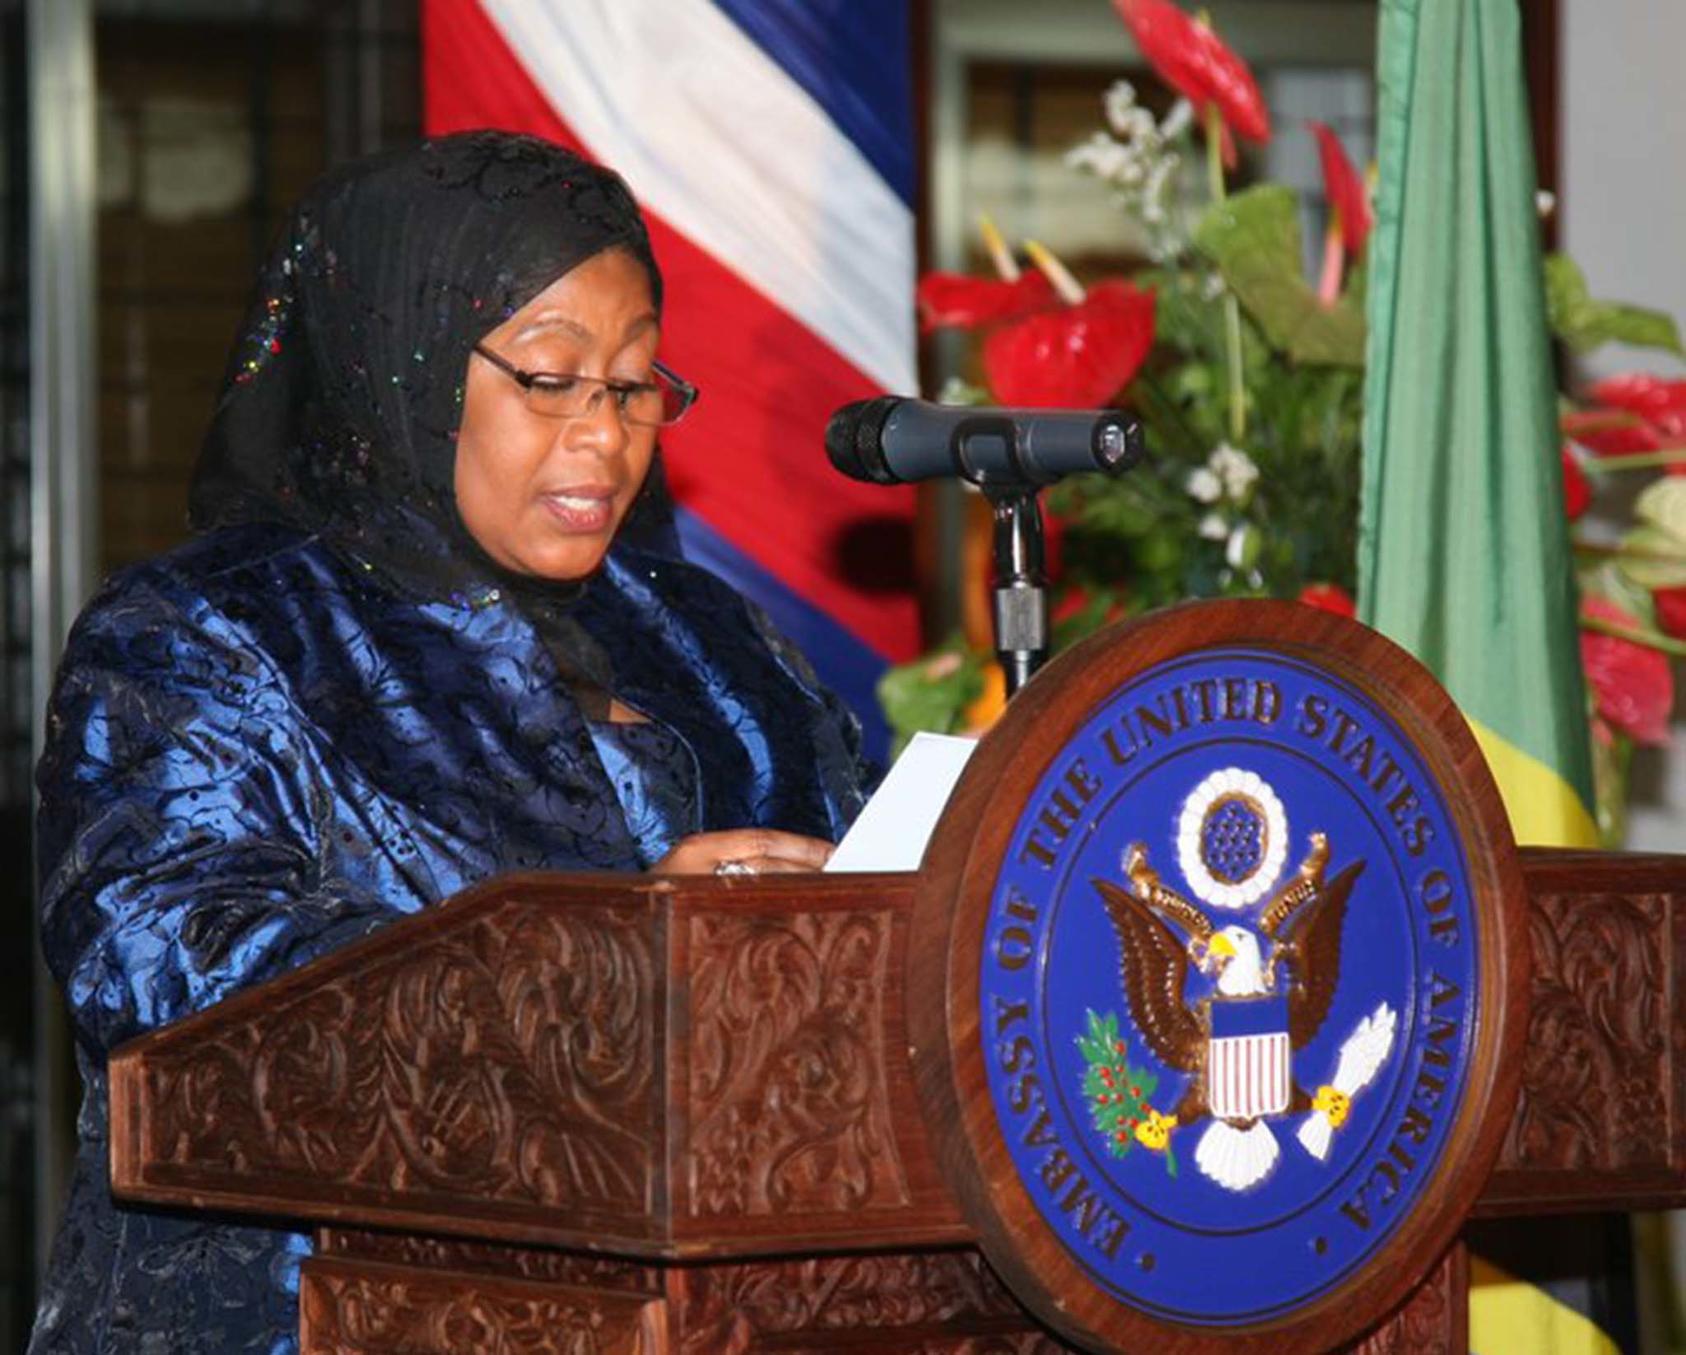 Tanzania’s new president is Samia Suluhu Hassan. As a member of parliament in 2011 she spoke at the U.S. Embassy in Dar es Salaam. (U.S. Embassy, Dar es Salaam)